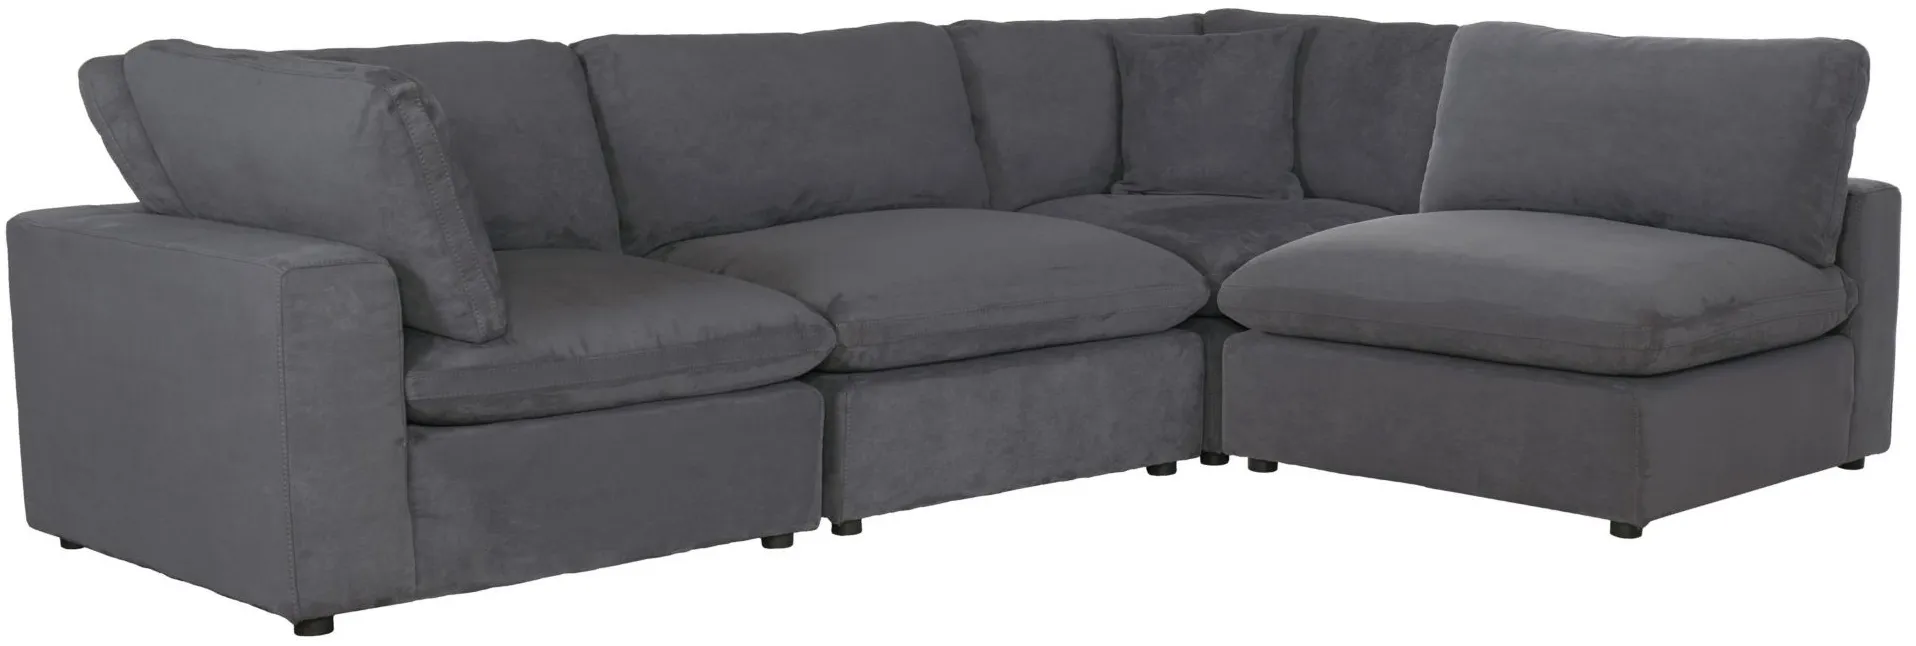 Swallowtail 4-pc Modular Sectional Sofa in Gray by Homelegance